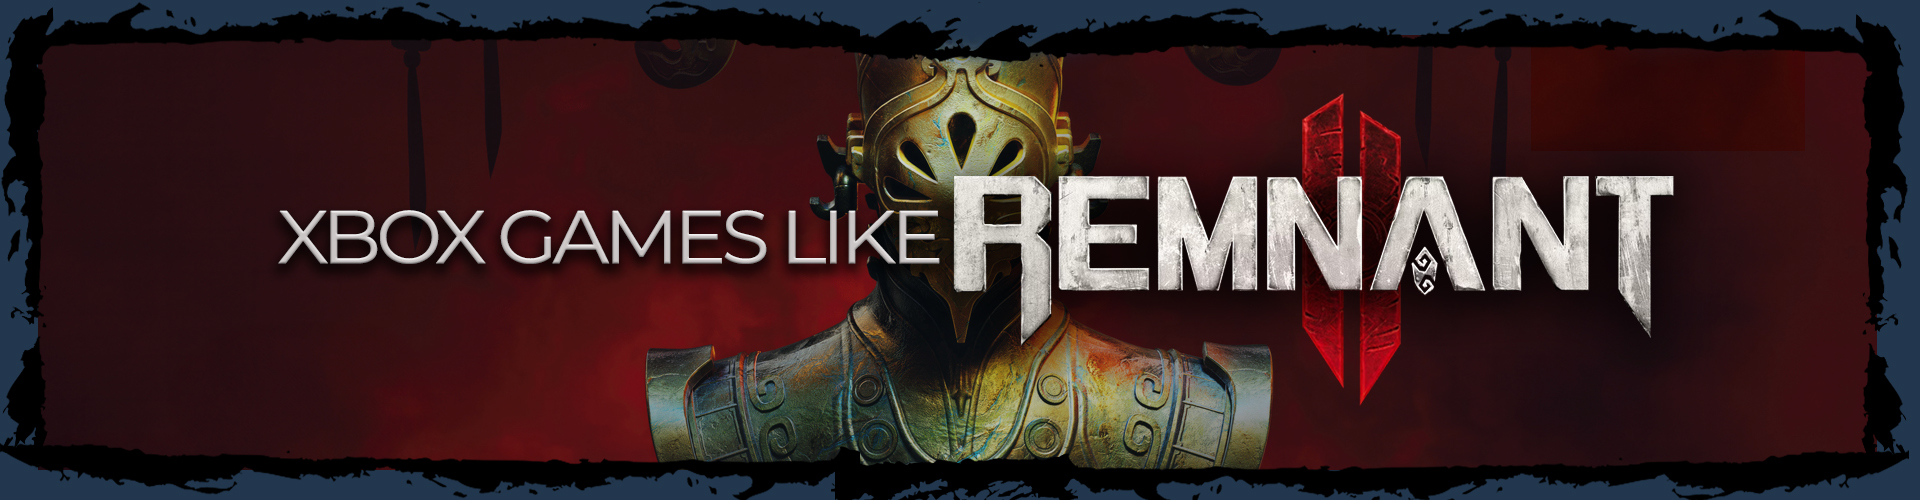 Xbox Games Like Remnant 2